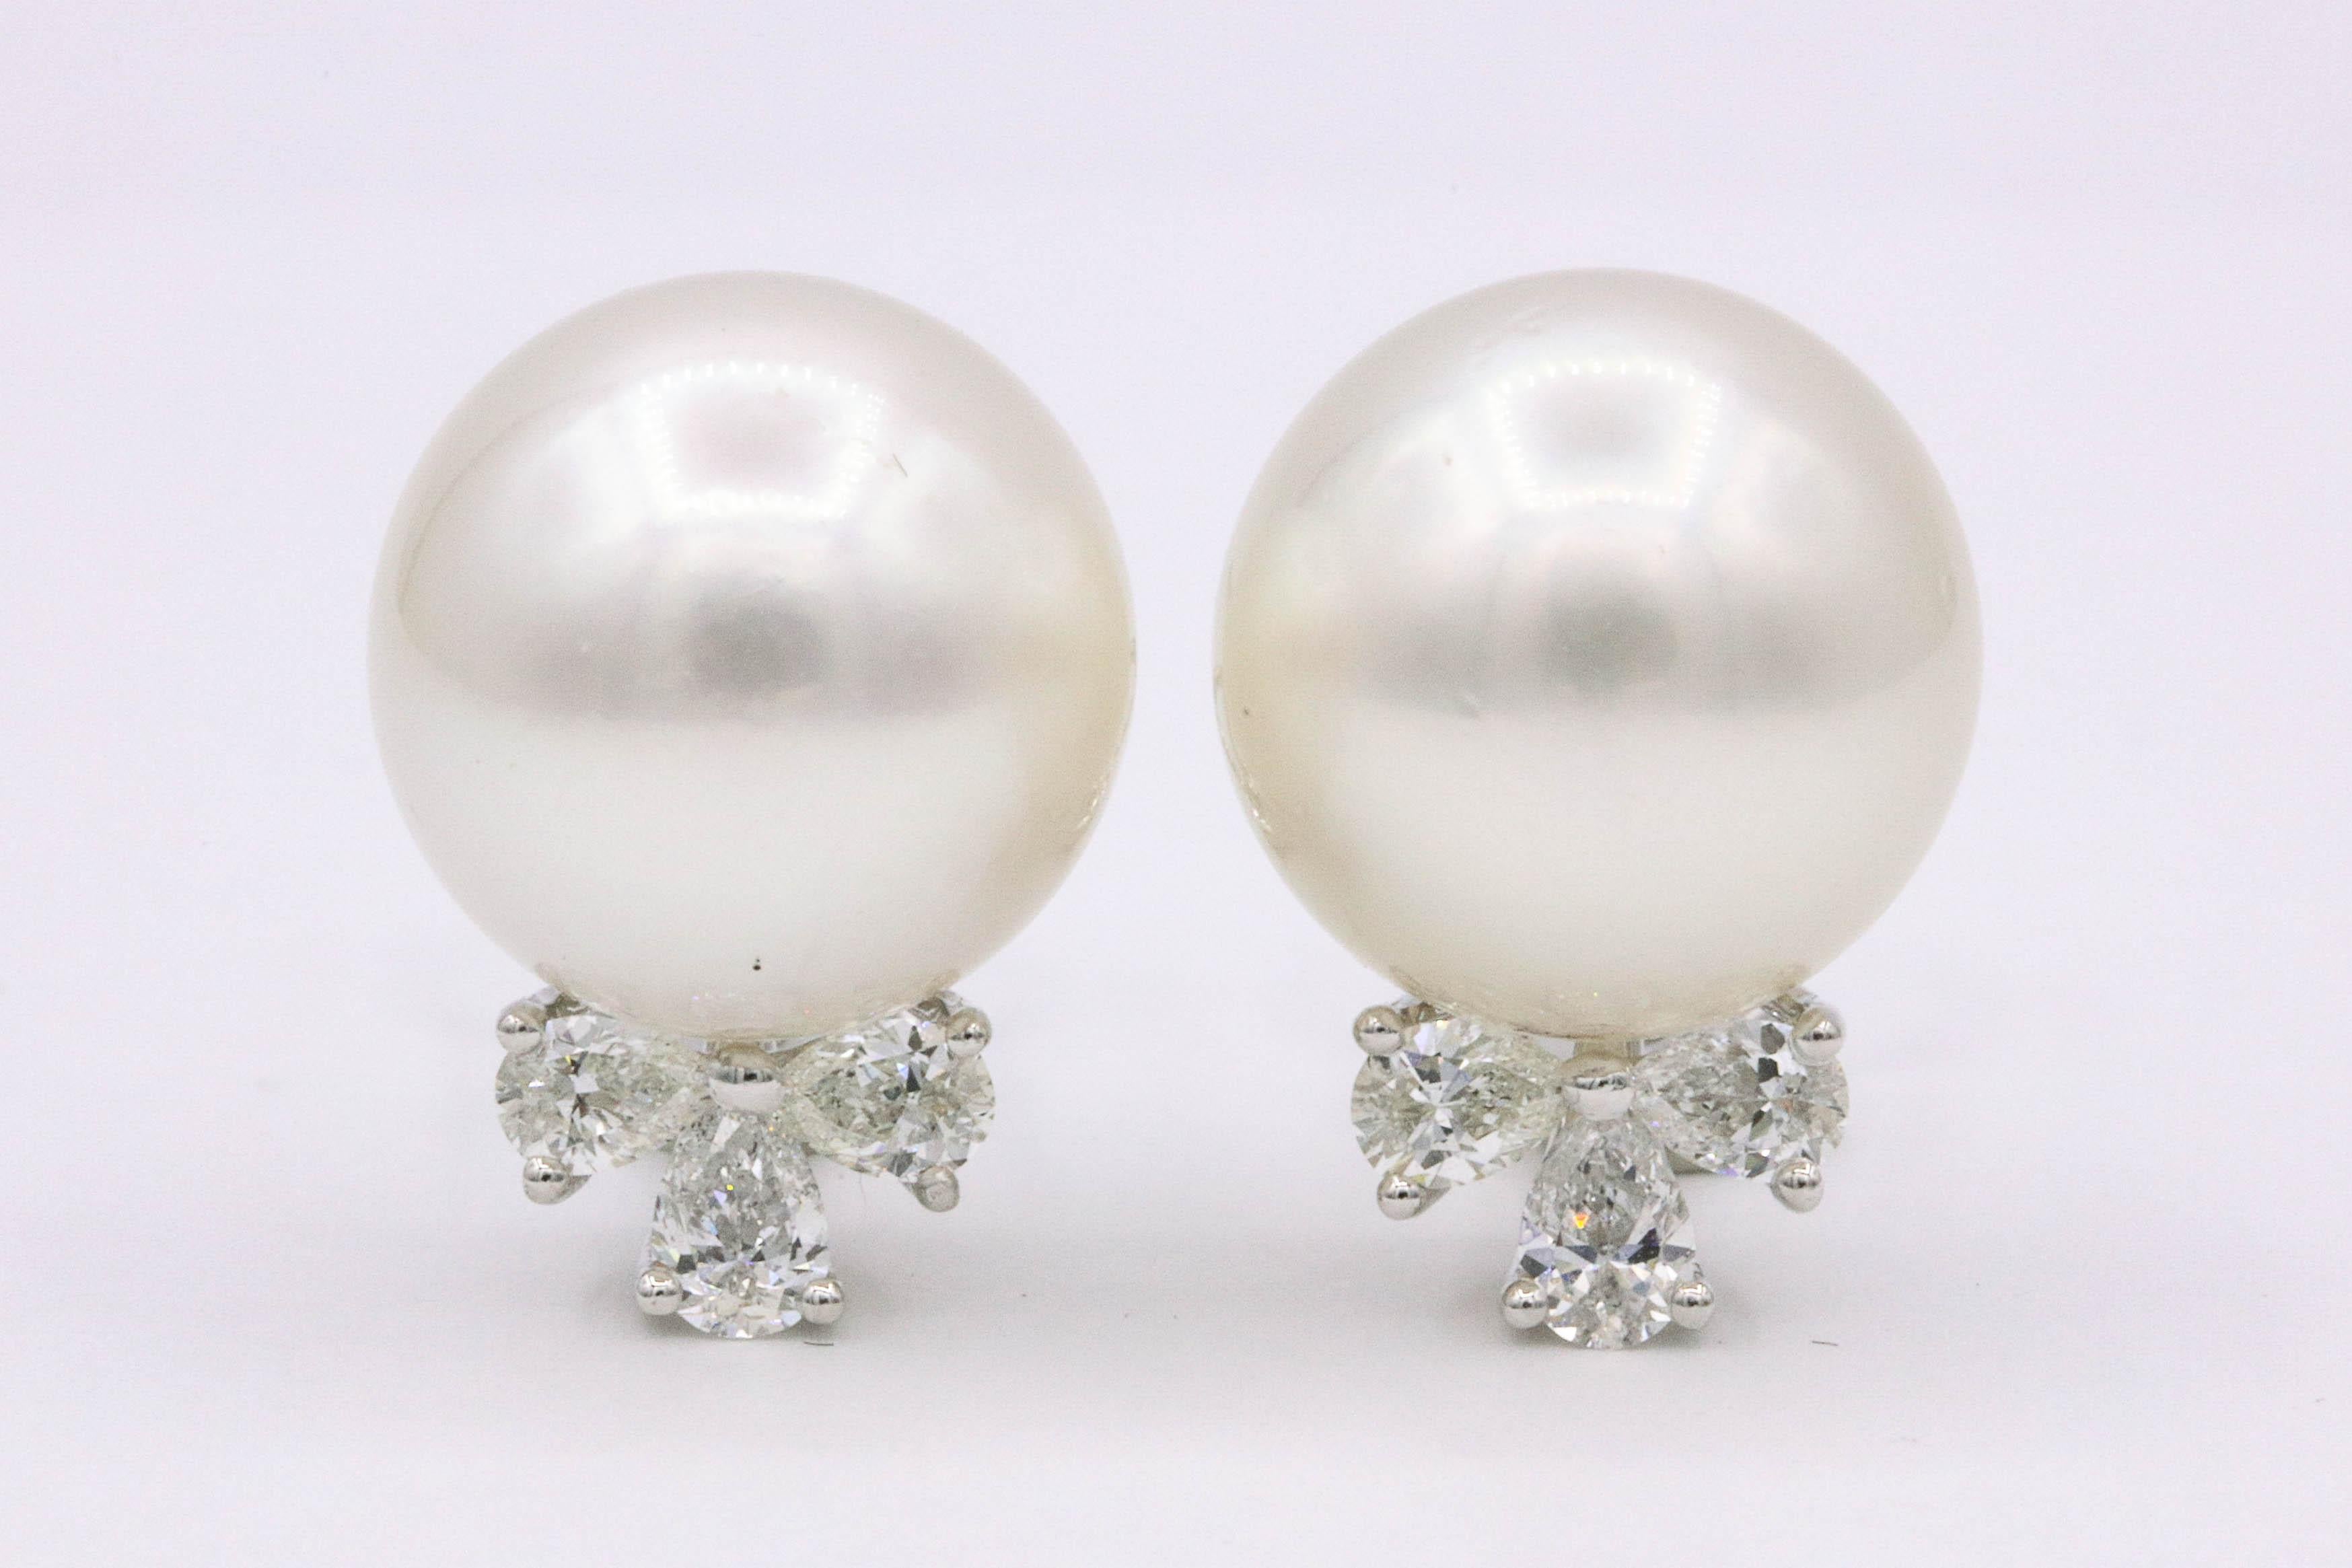 Elegant South Sea Pearl earrings featuring 6 pear shape diamonds weighing 0.85 carats in 18k white gold. 
South Sea Pearl: 13-14 mm
Color G-H
Clarity SI